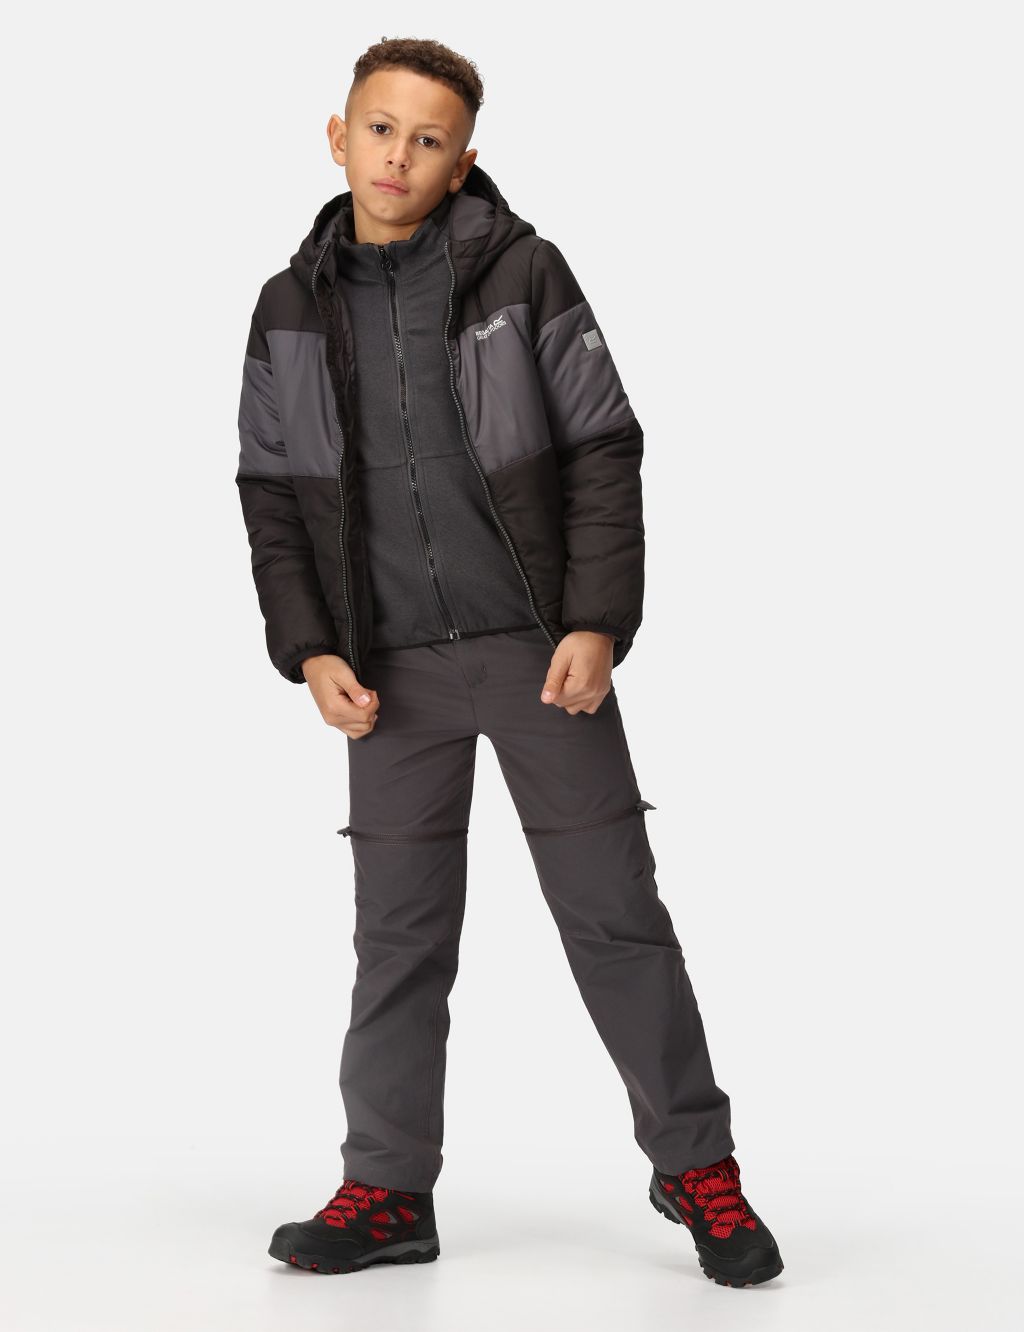 Lofthouse VII Water-Repellent Hooded Jacket (3-14 Yrs) image 4